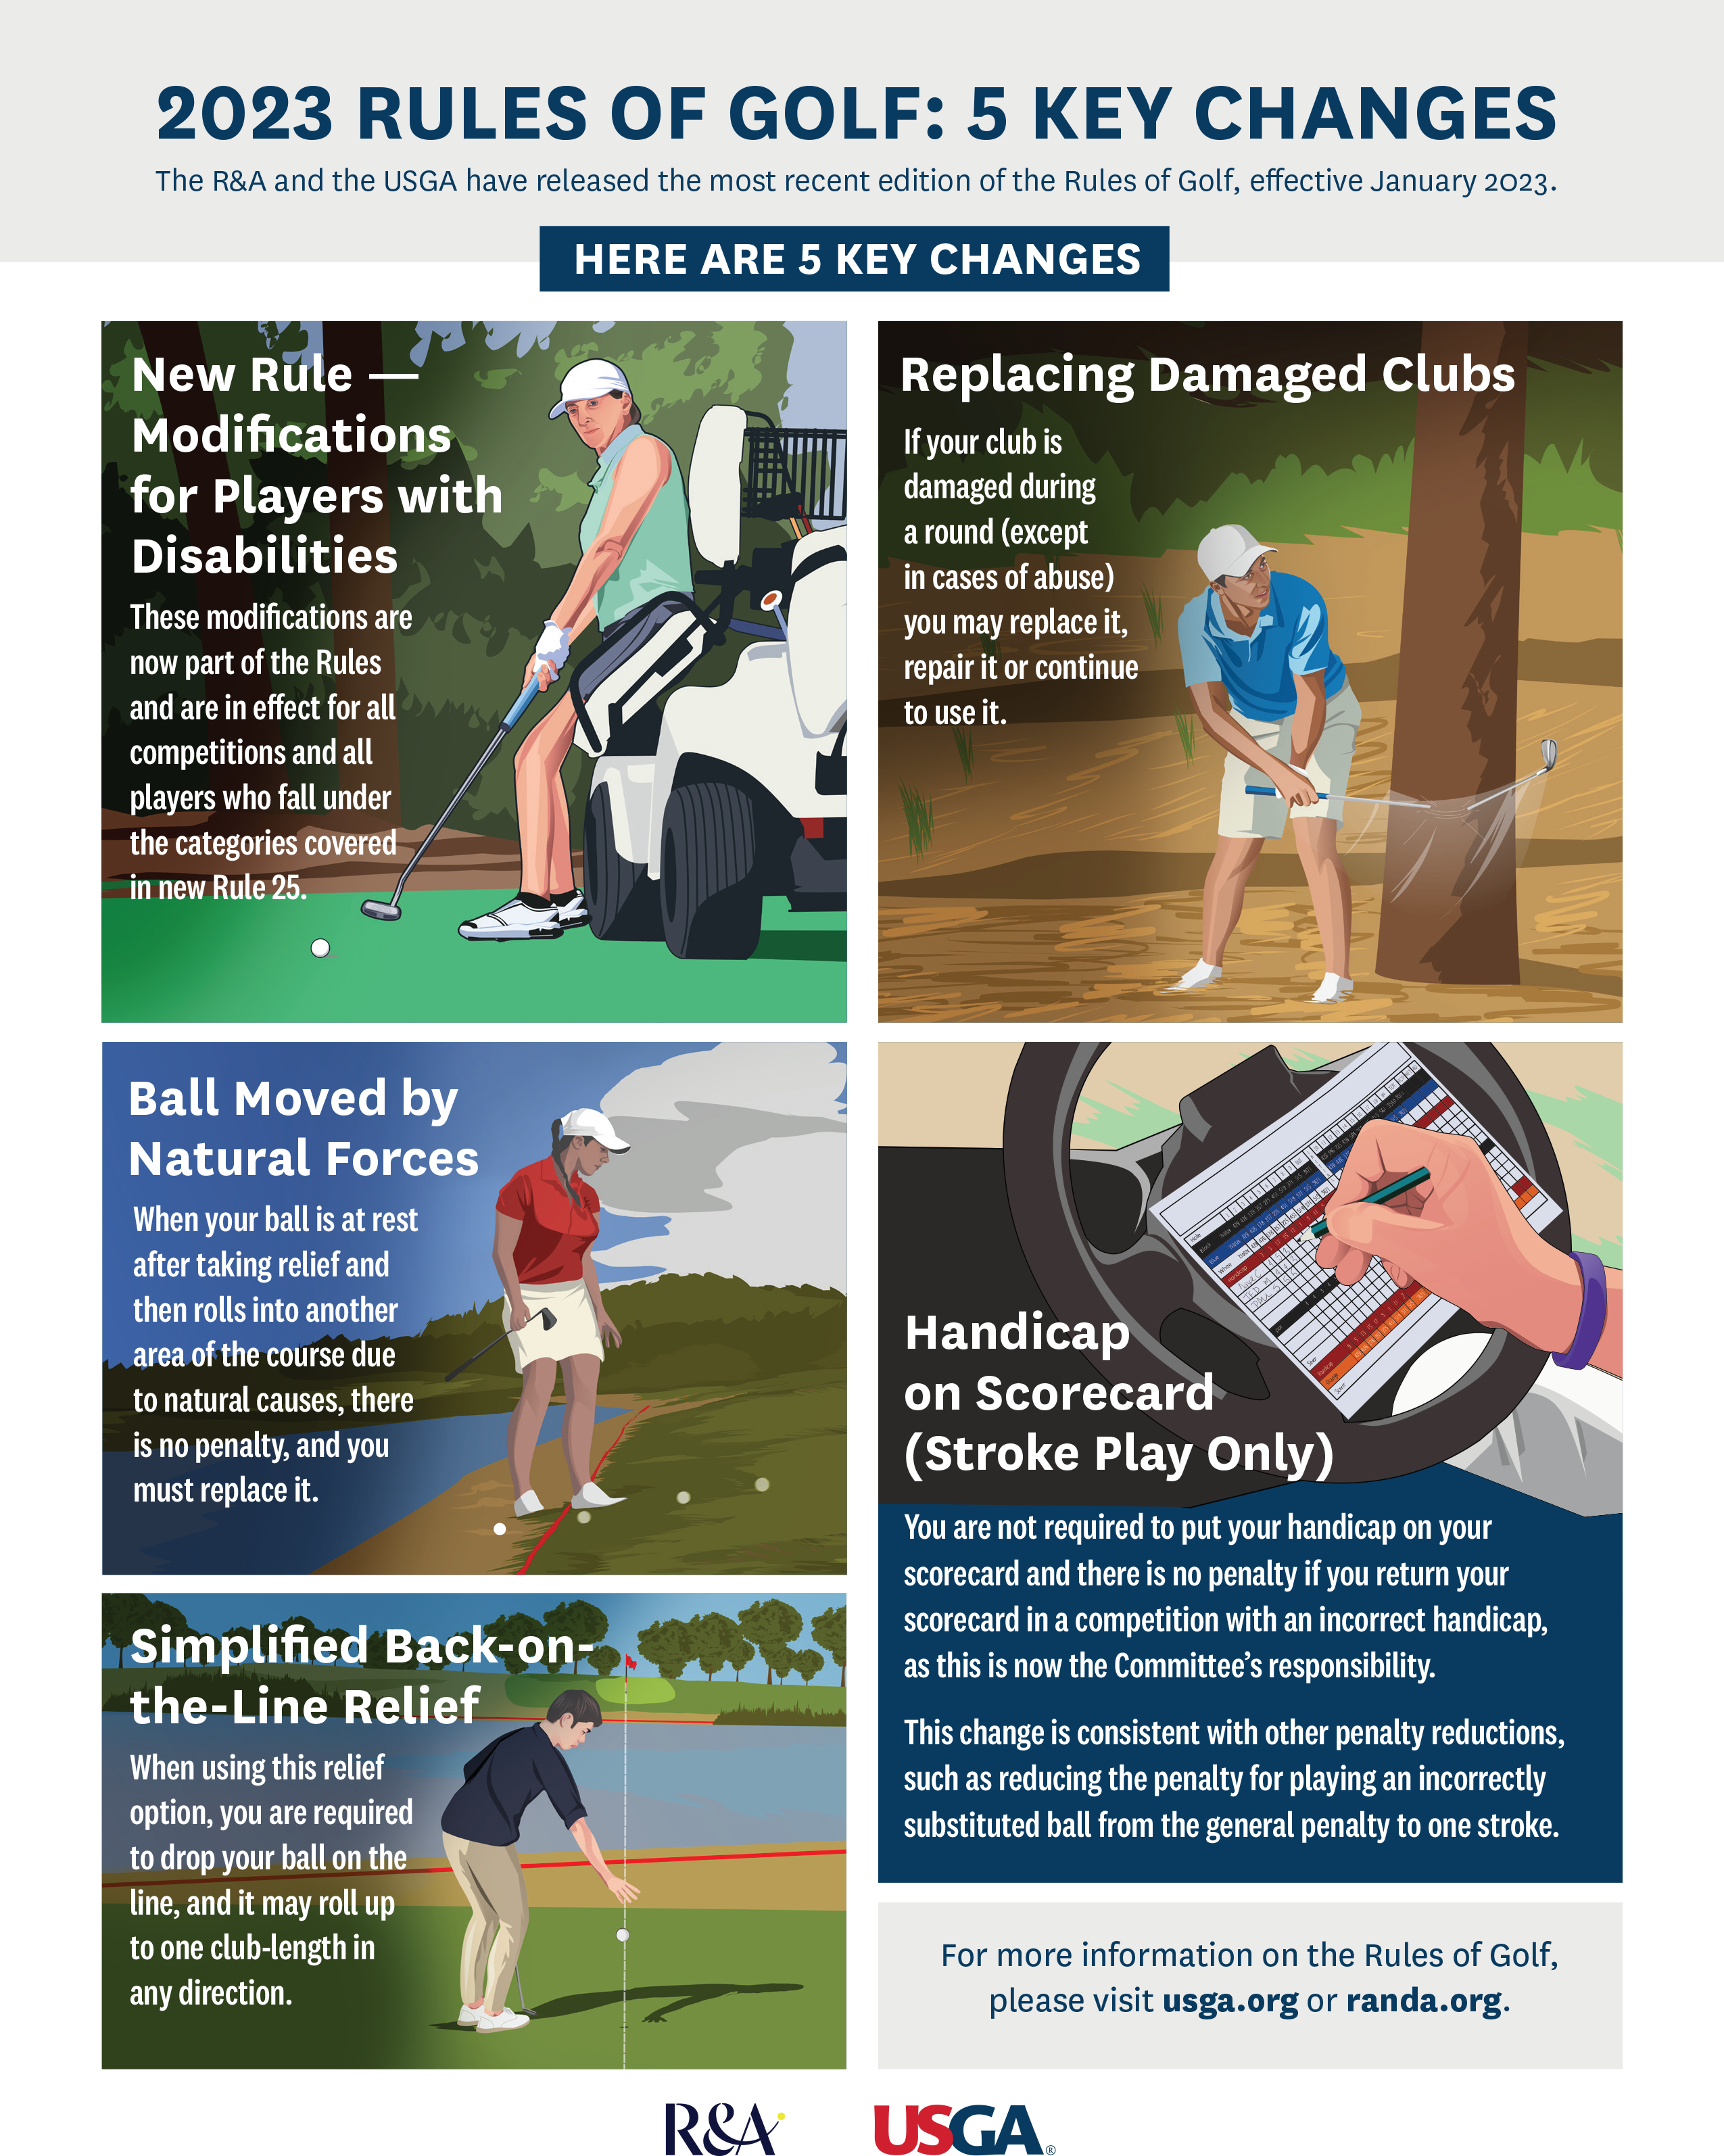 5 Key Changes to the 2023 Rules of Golf